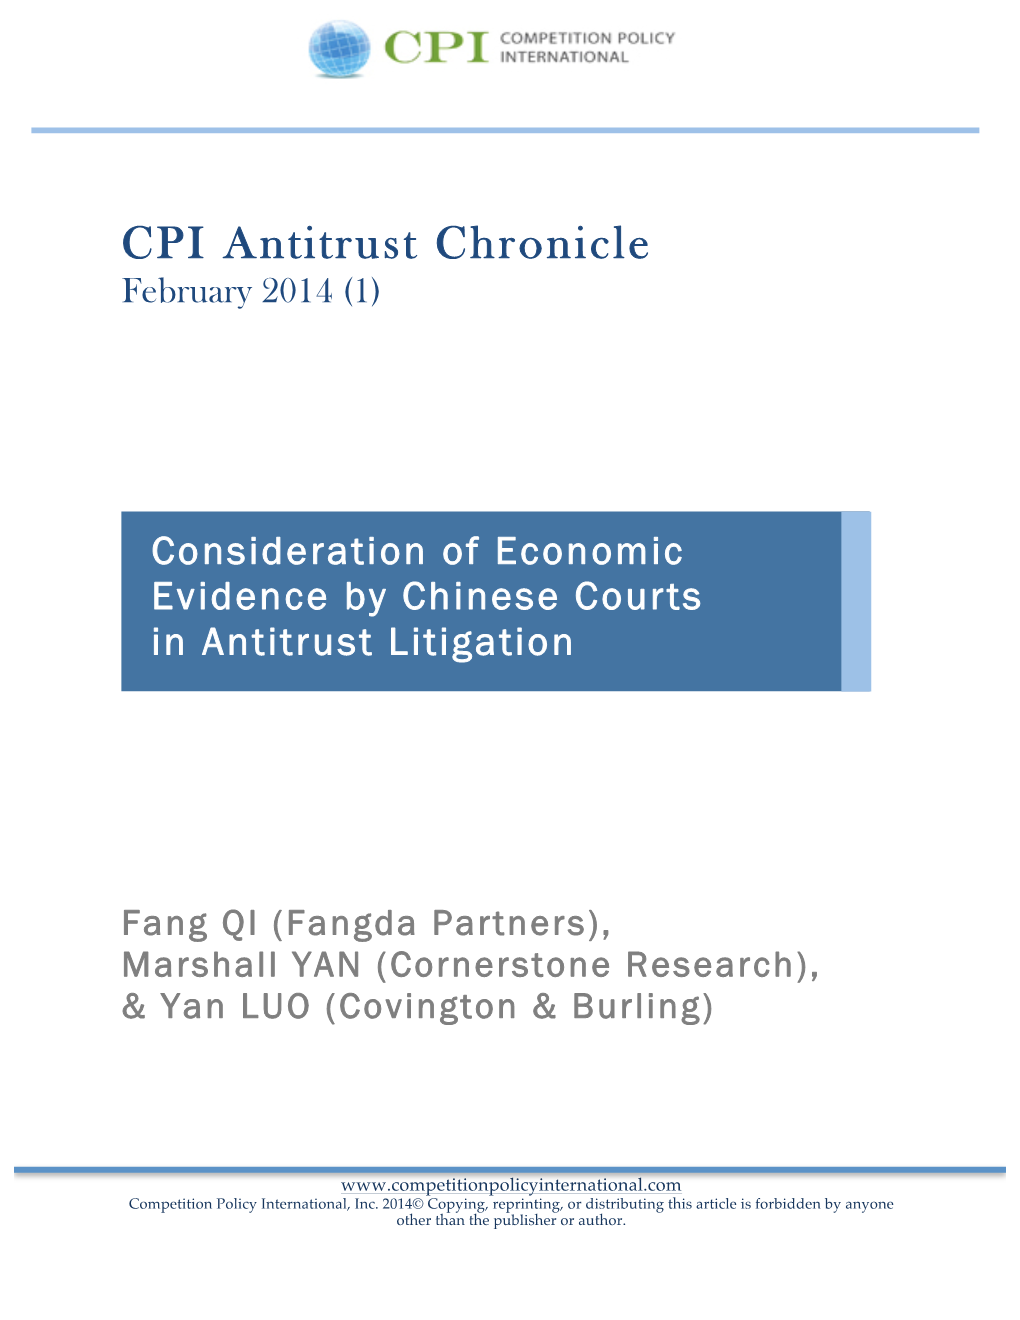 Consideration of Economic Evidence by Chinese Courts in Antitrust Litigation